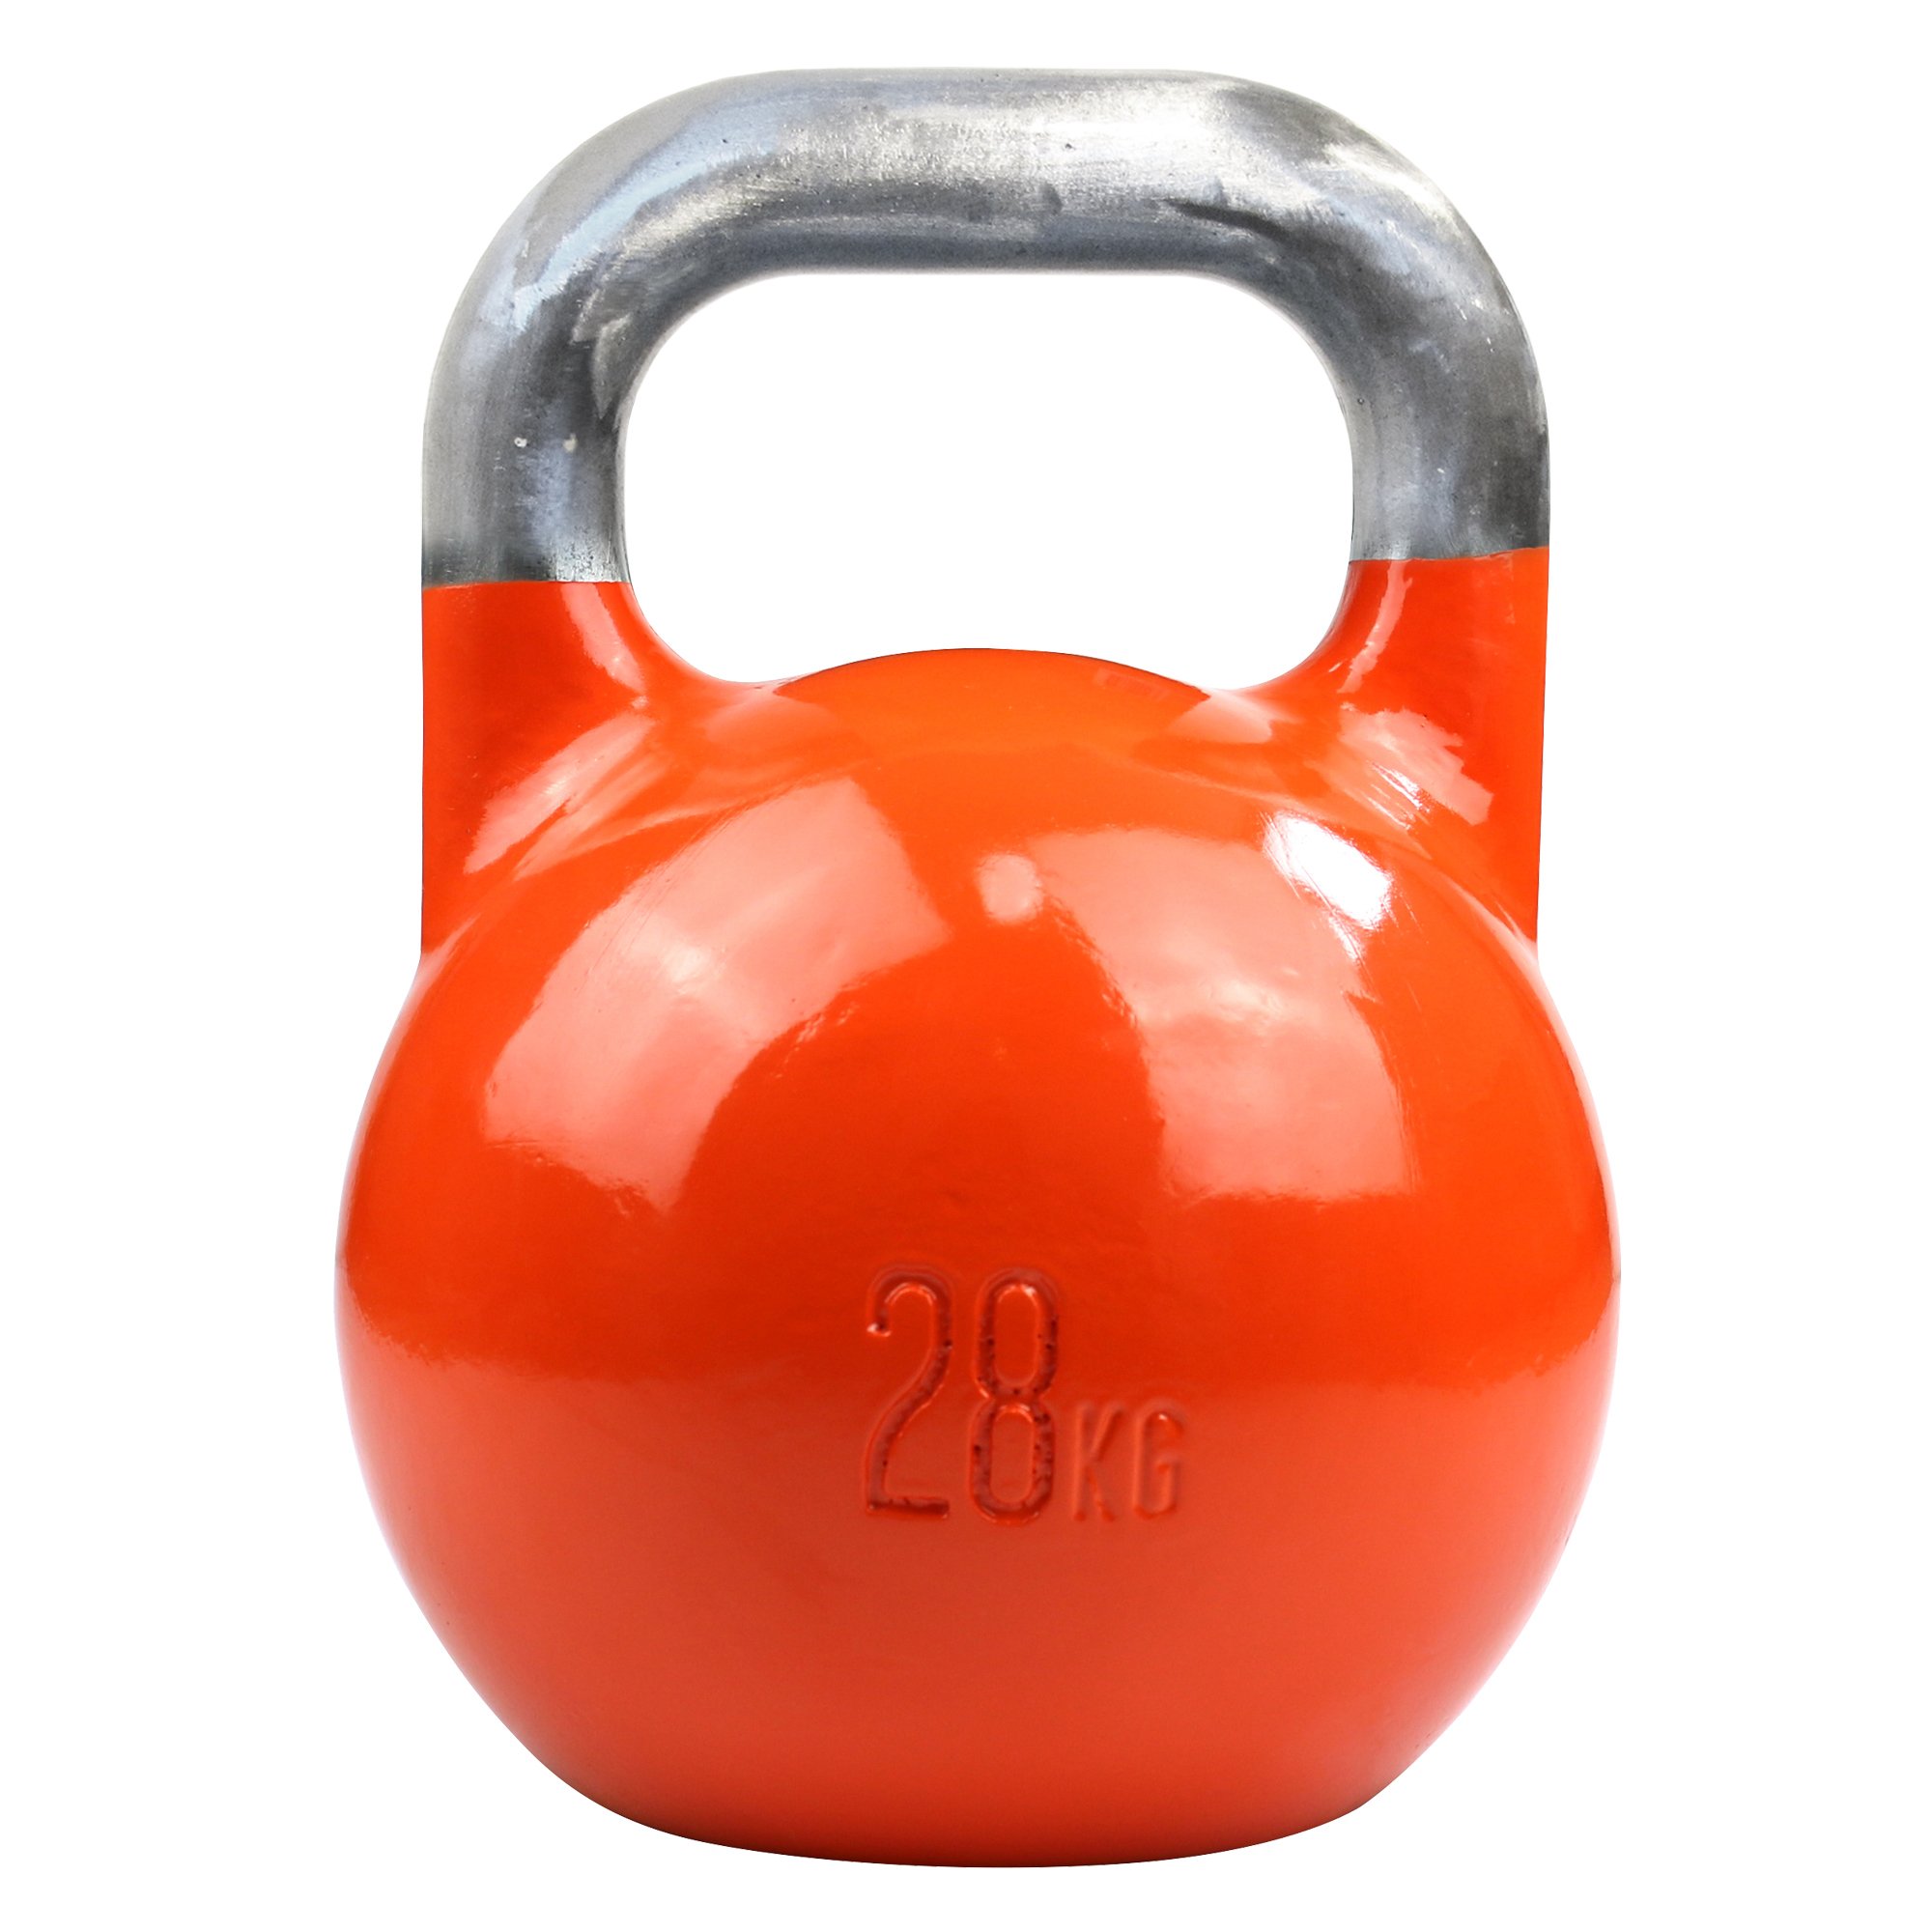 TITAN LIFE PRO Kettlebell Steel Competition 28 Kg.